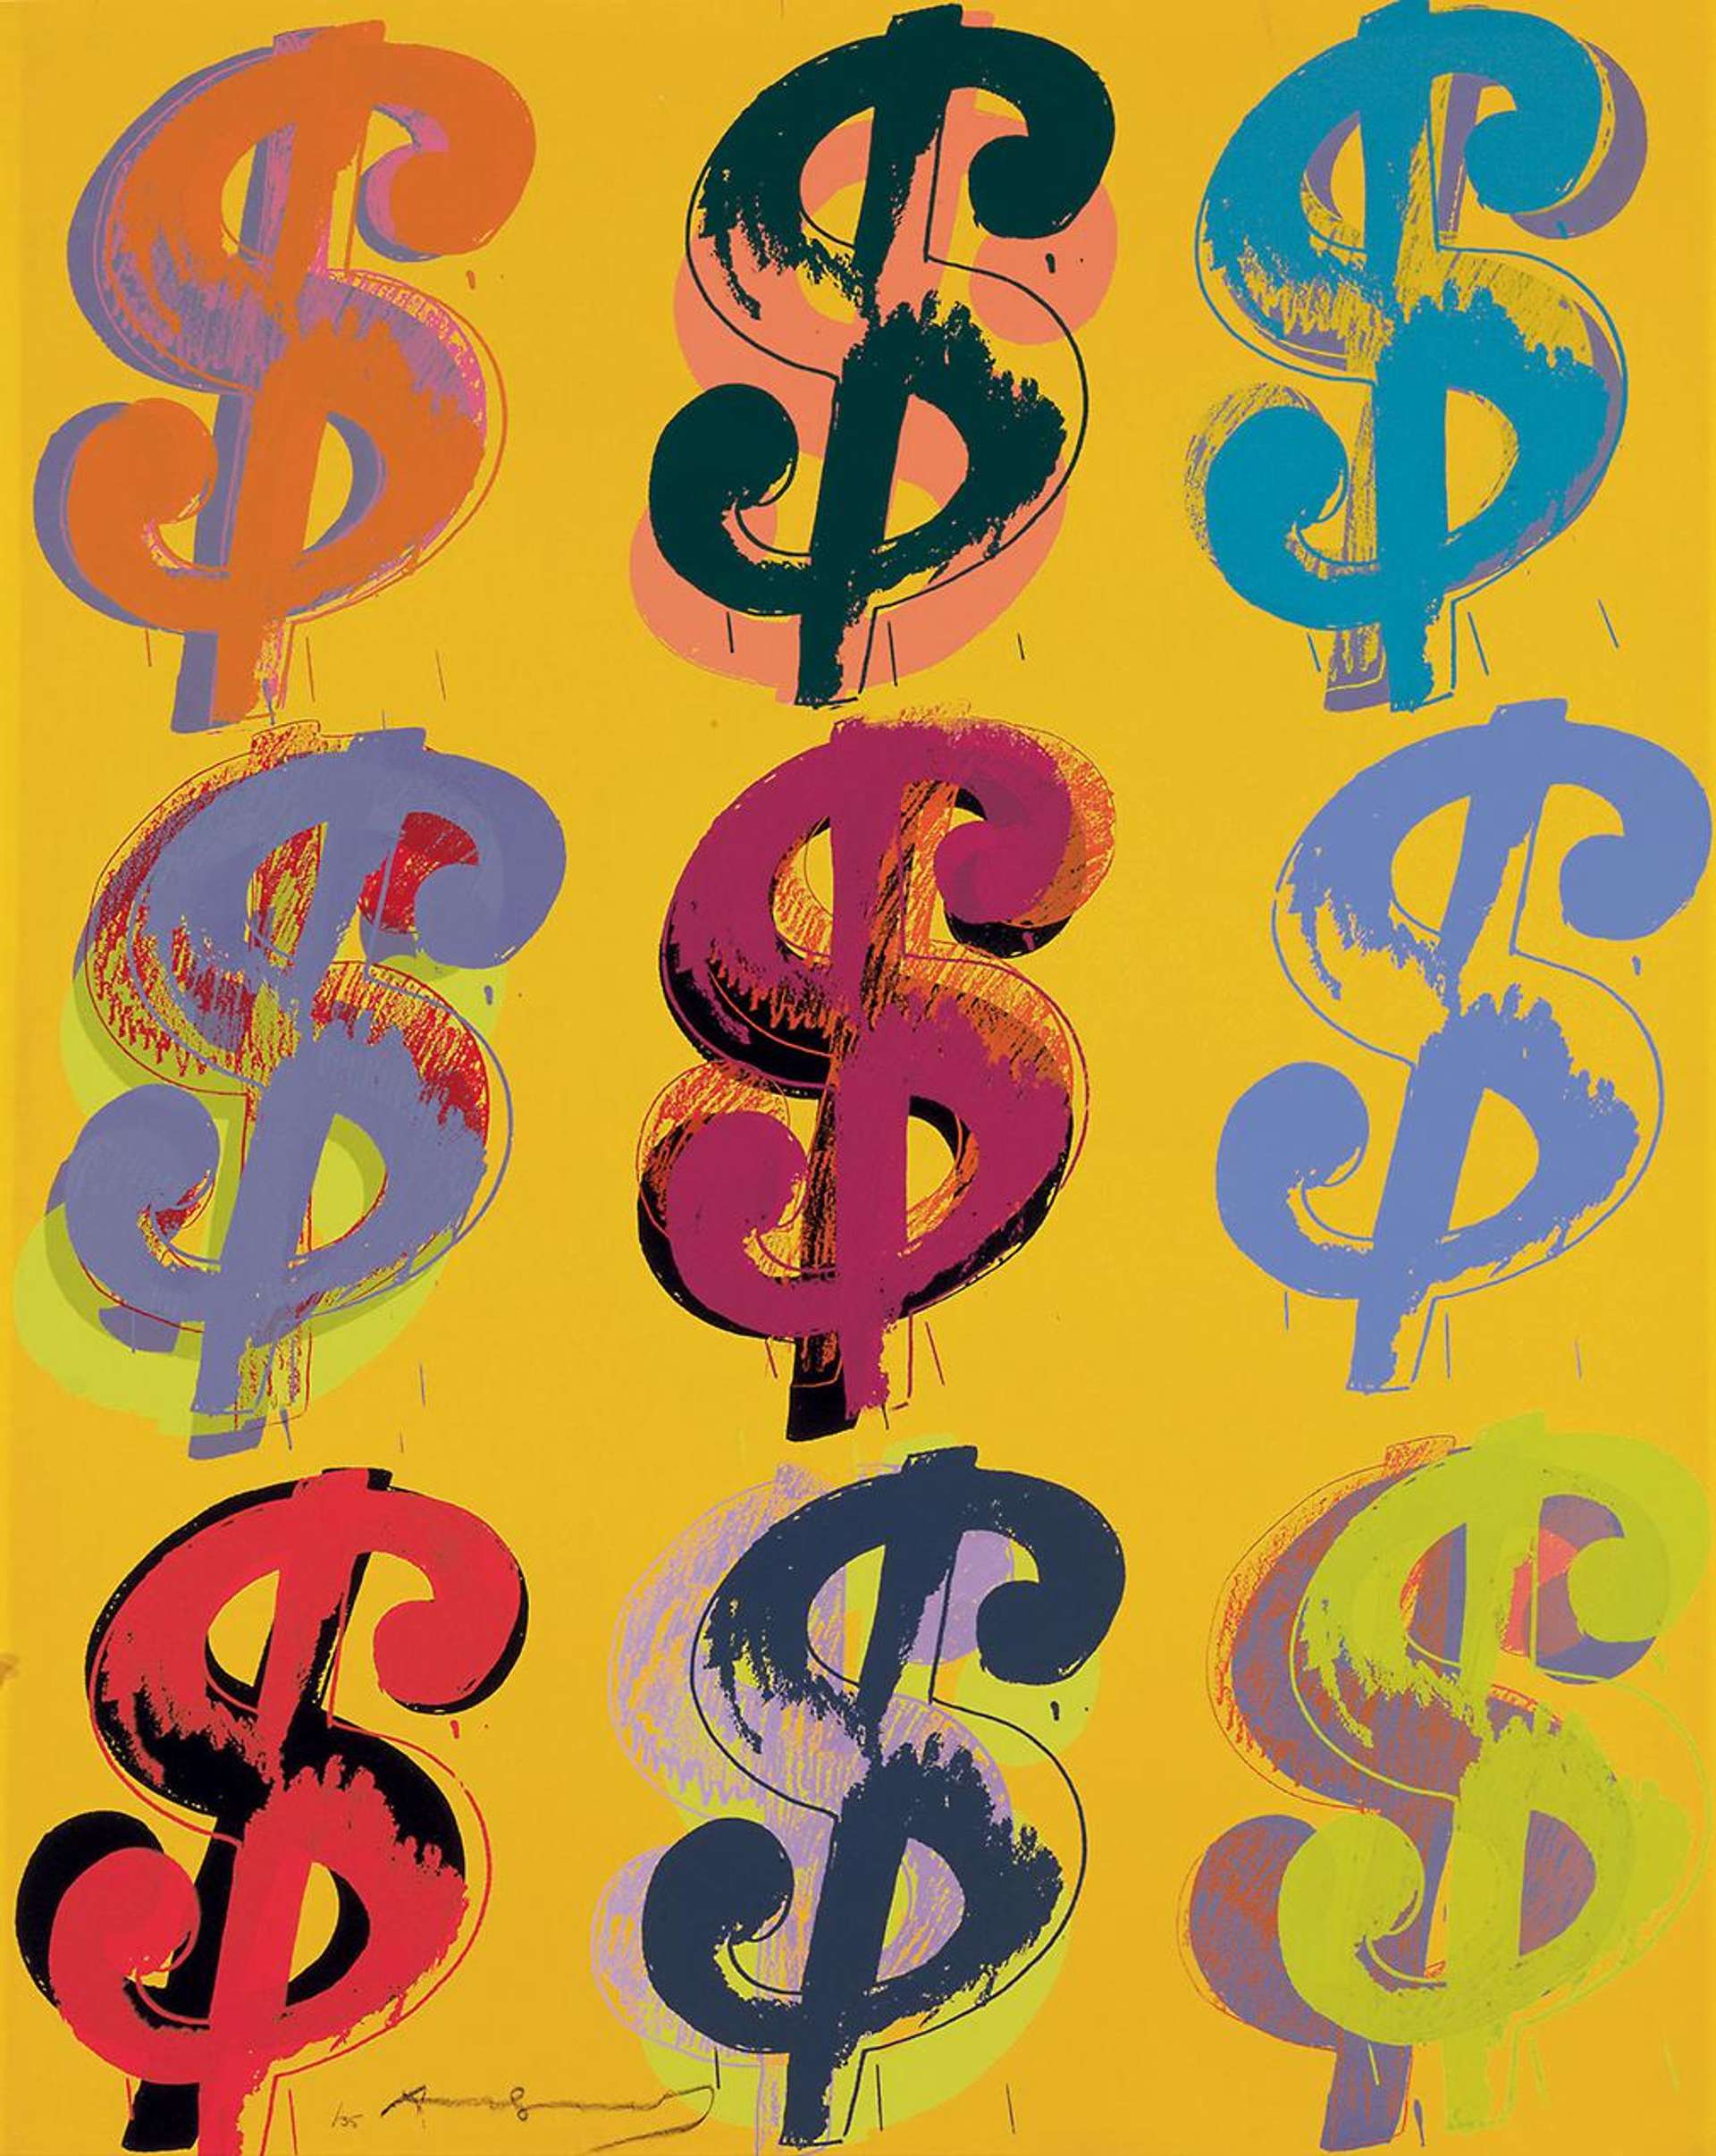 Nine multi-coloured dollar signs in a 3x3 grid on a pink backdrop